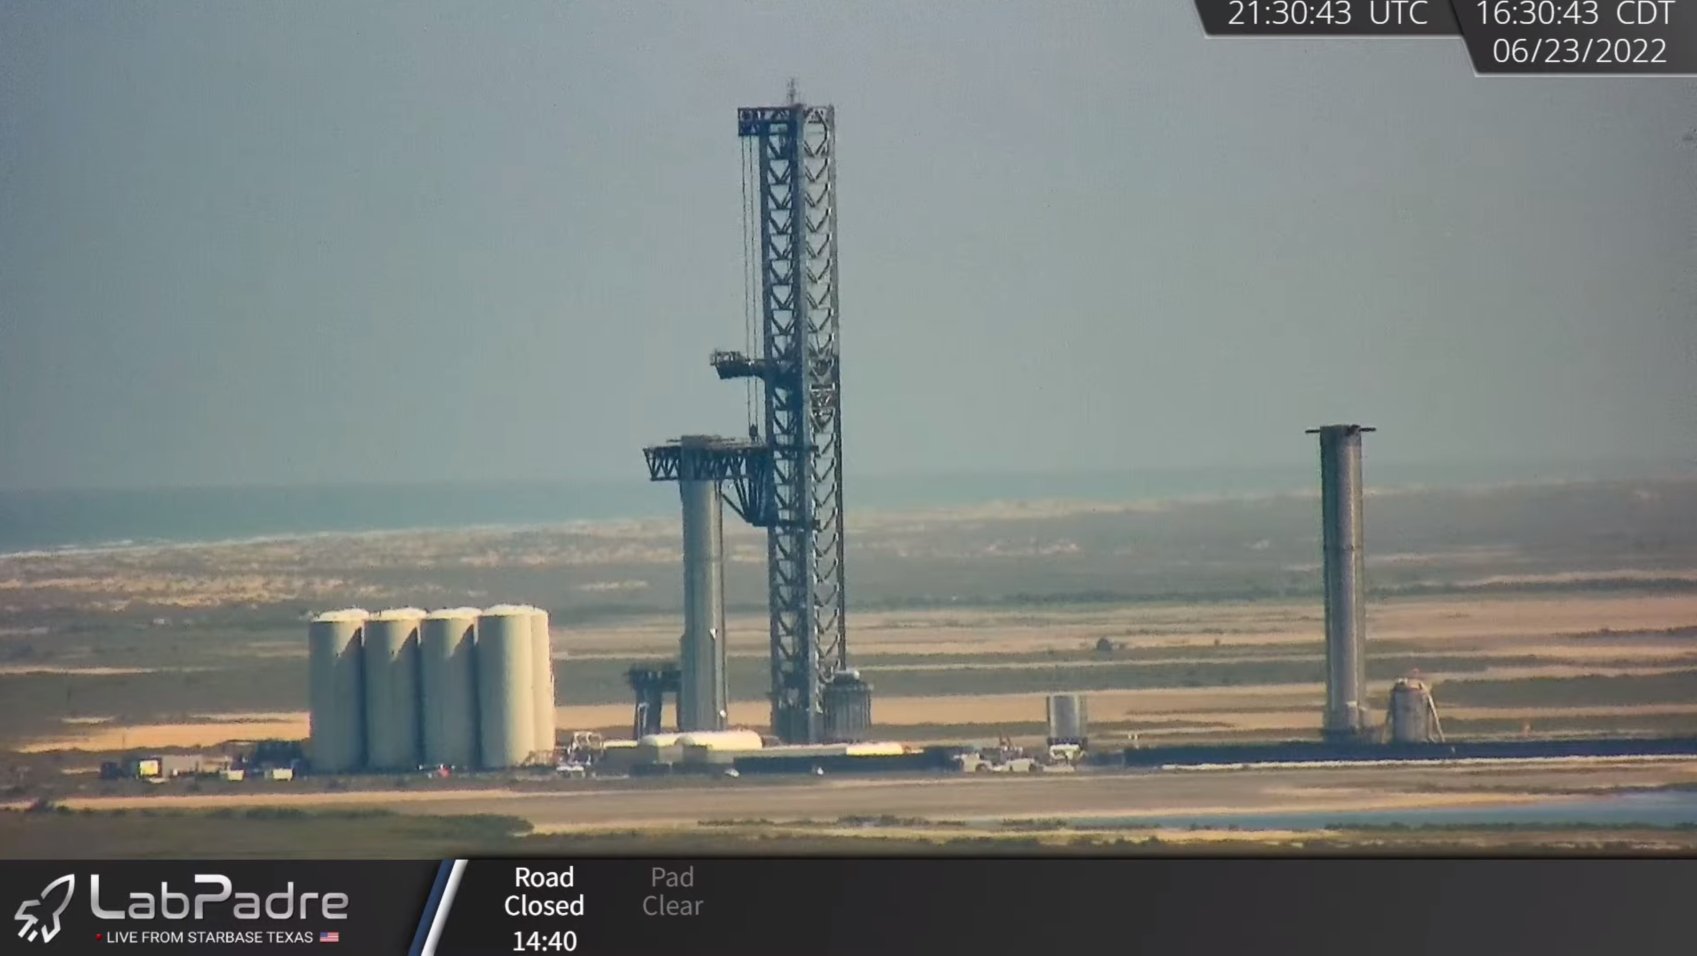 SpaceX uses robotic launch tower arms to lift Super Heavy rocket on mount for the first time [VIDEO]